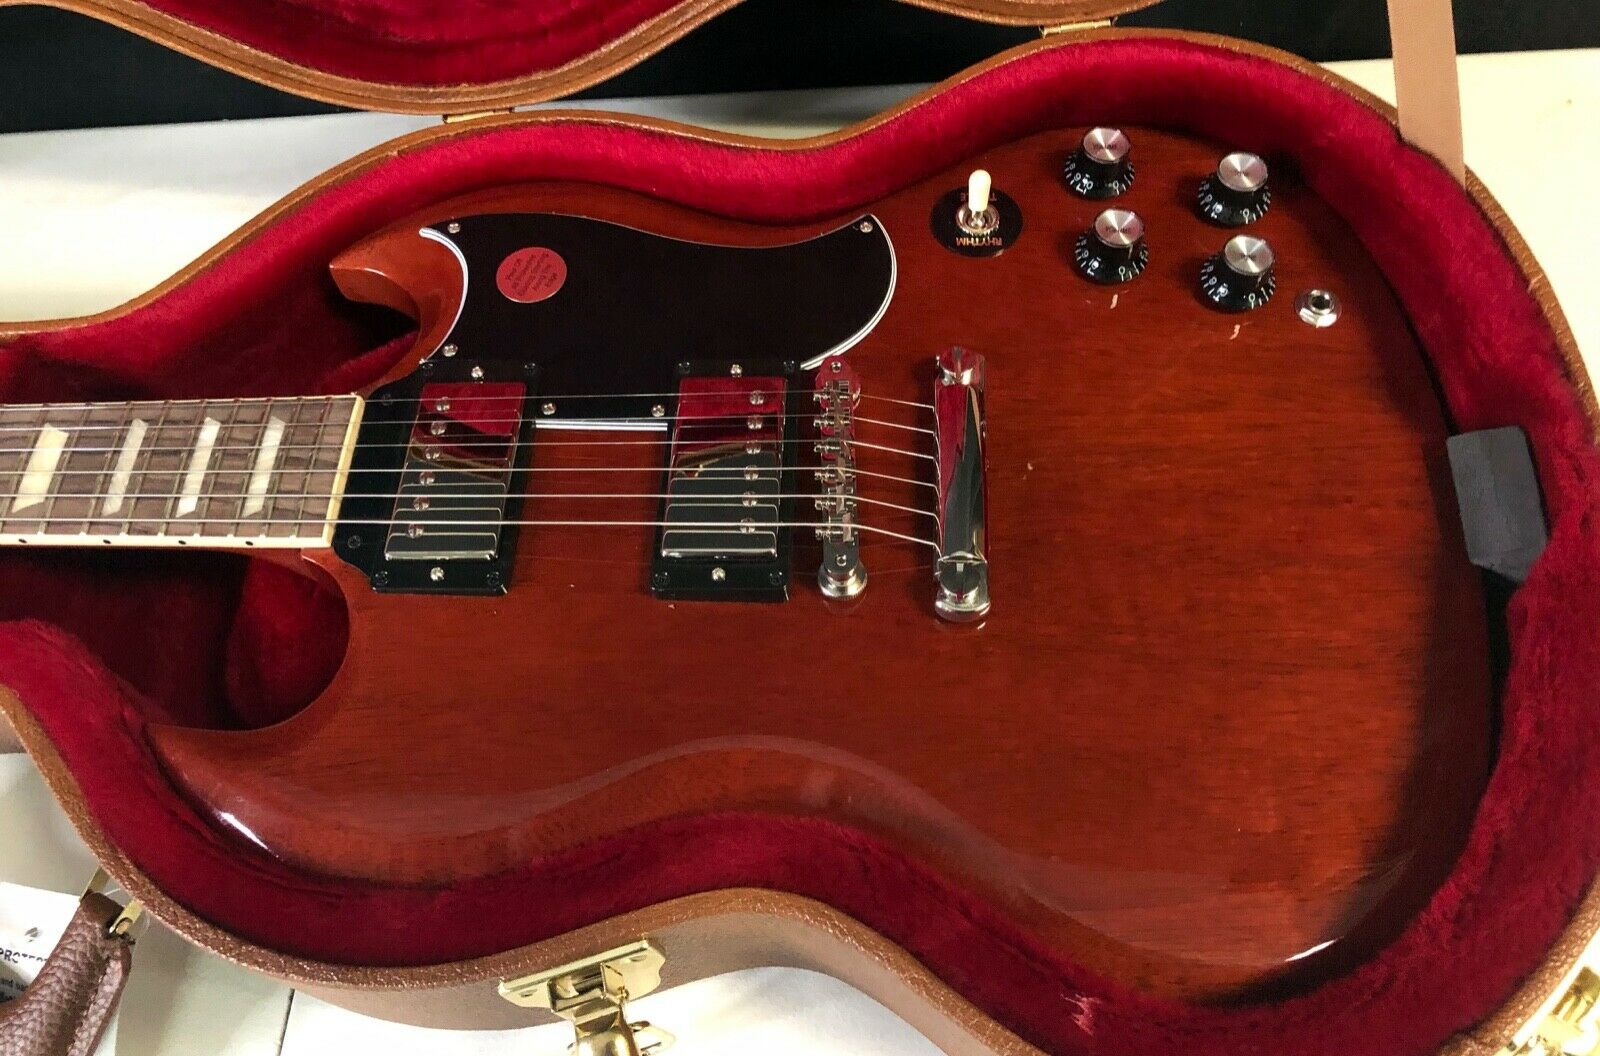 Mint! 2021 Gibson Sg '61 Stop Tail - Vintage Cherry Finish - Original Case Save!